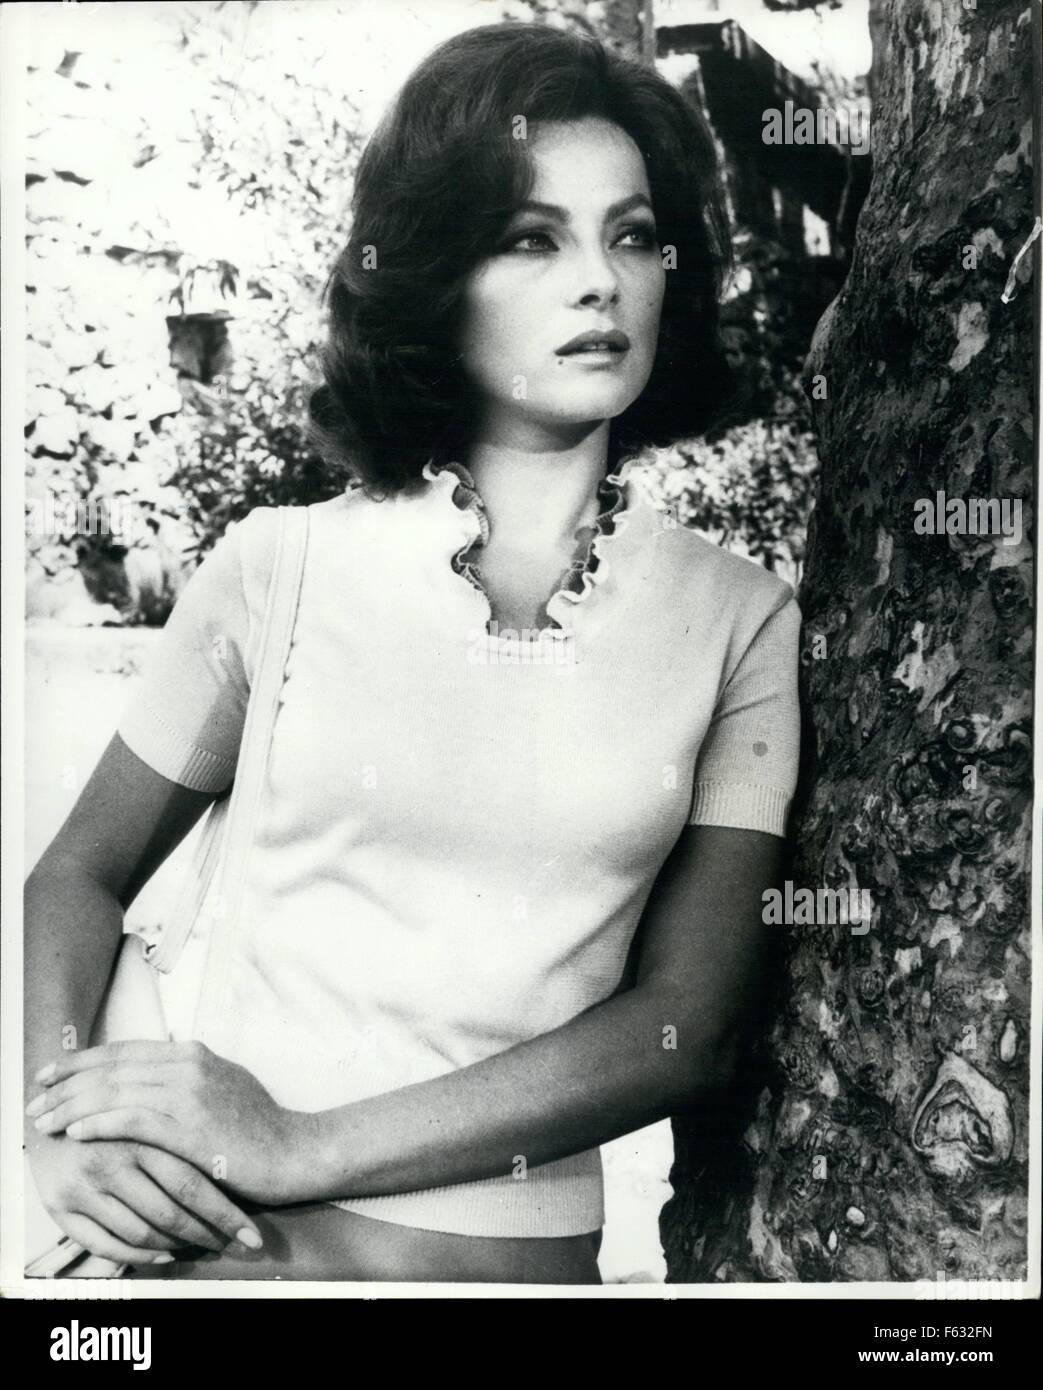 1972 - The Lovely Virna Lisi - Bruenette; The wine of the village is at stake, the life of her sweetheart is in peril in The secret of Santa Vittoria but lovely Virna LIsi, now on the screen as a brunette instead of a blonde, uses her famous charms as her weapons of defense. She plays the role of Caterina Malatsta, the countess with a tarnished reputation. © Keystone Pictures USA/ZUMAPRESS.com/Alamy Live News Stock Photo